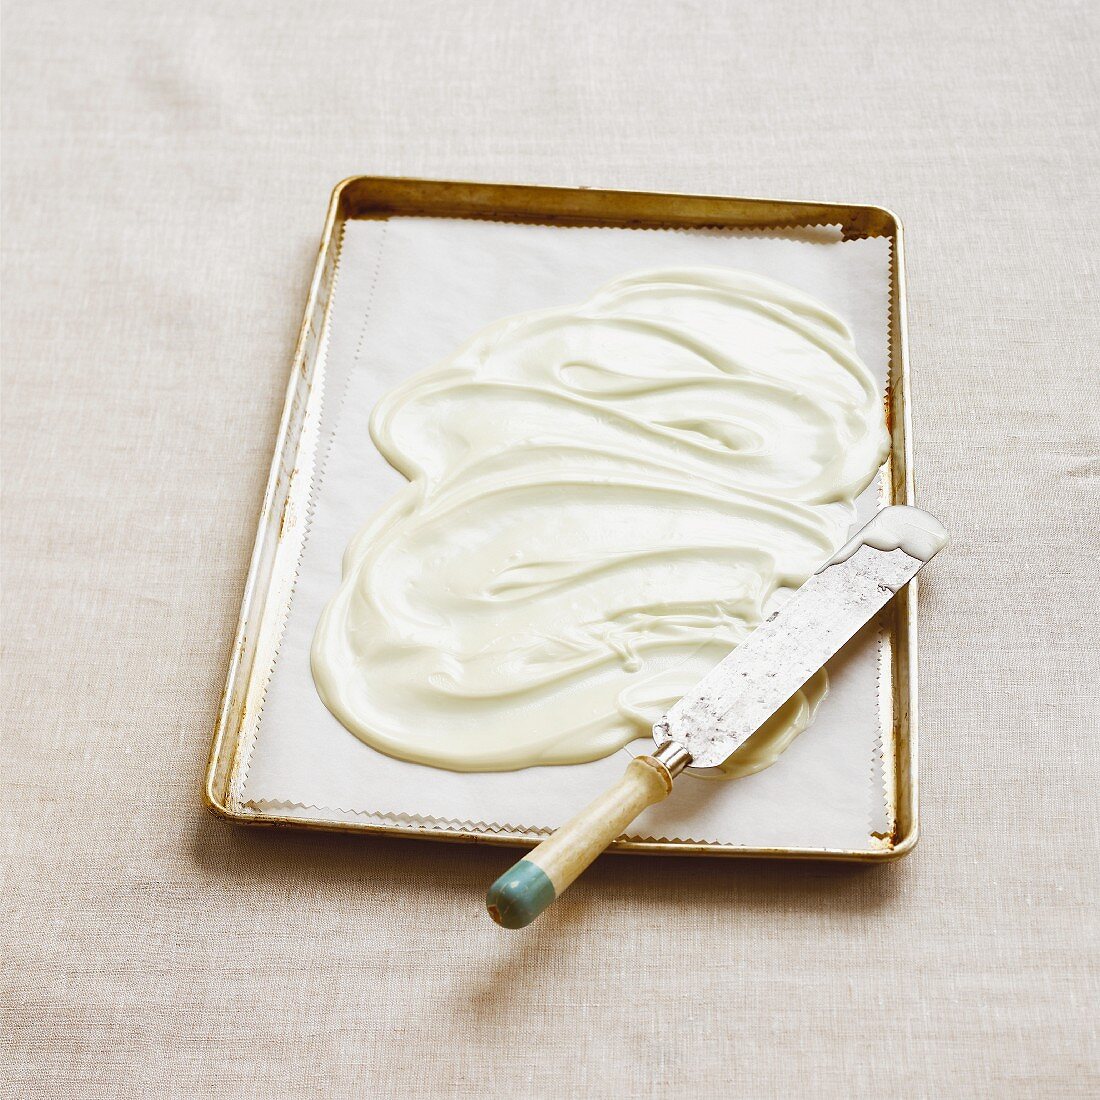 White chocolate cooking chocolate on a baking tray with a knife